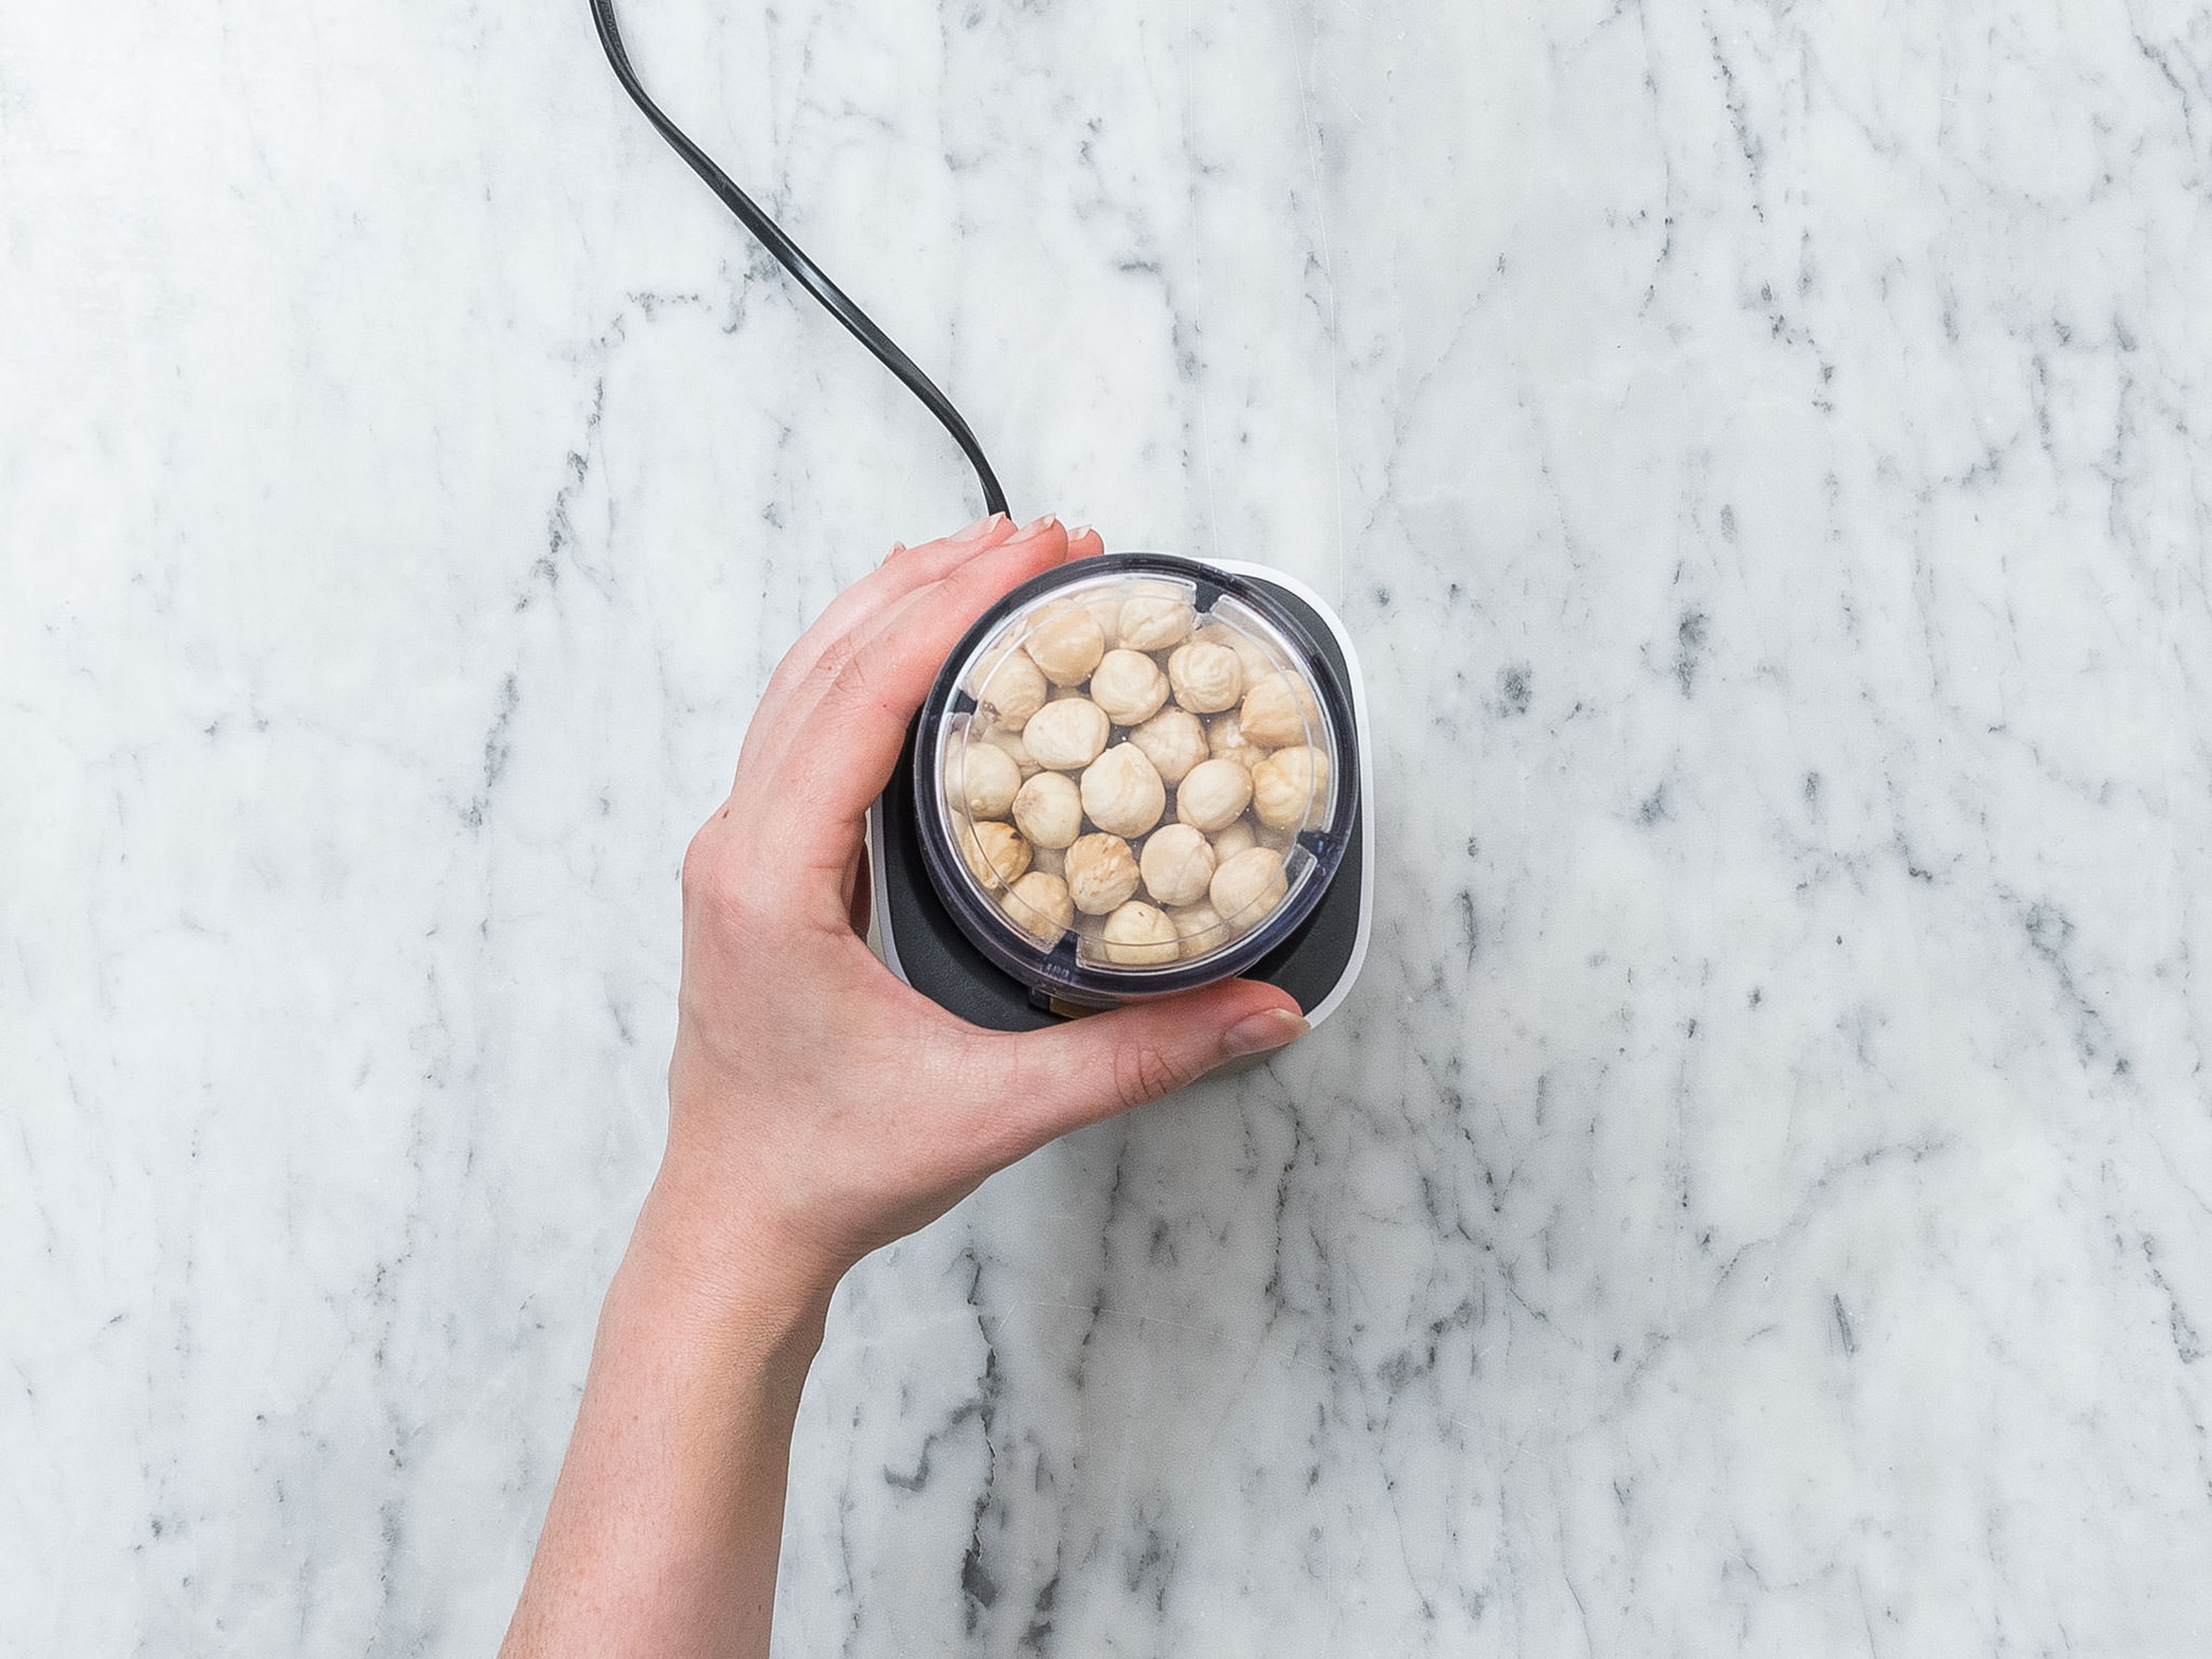 Toast hazelnuts in a frying pan set over medium heat for approx. 5 min. Transfer hot hazelnuts to a kitchen towel. Rub together to peel nuts. Transfer skinned hazelnuts to a food processor and blend for approx. 10 min., or until creamy.